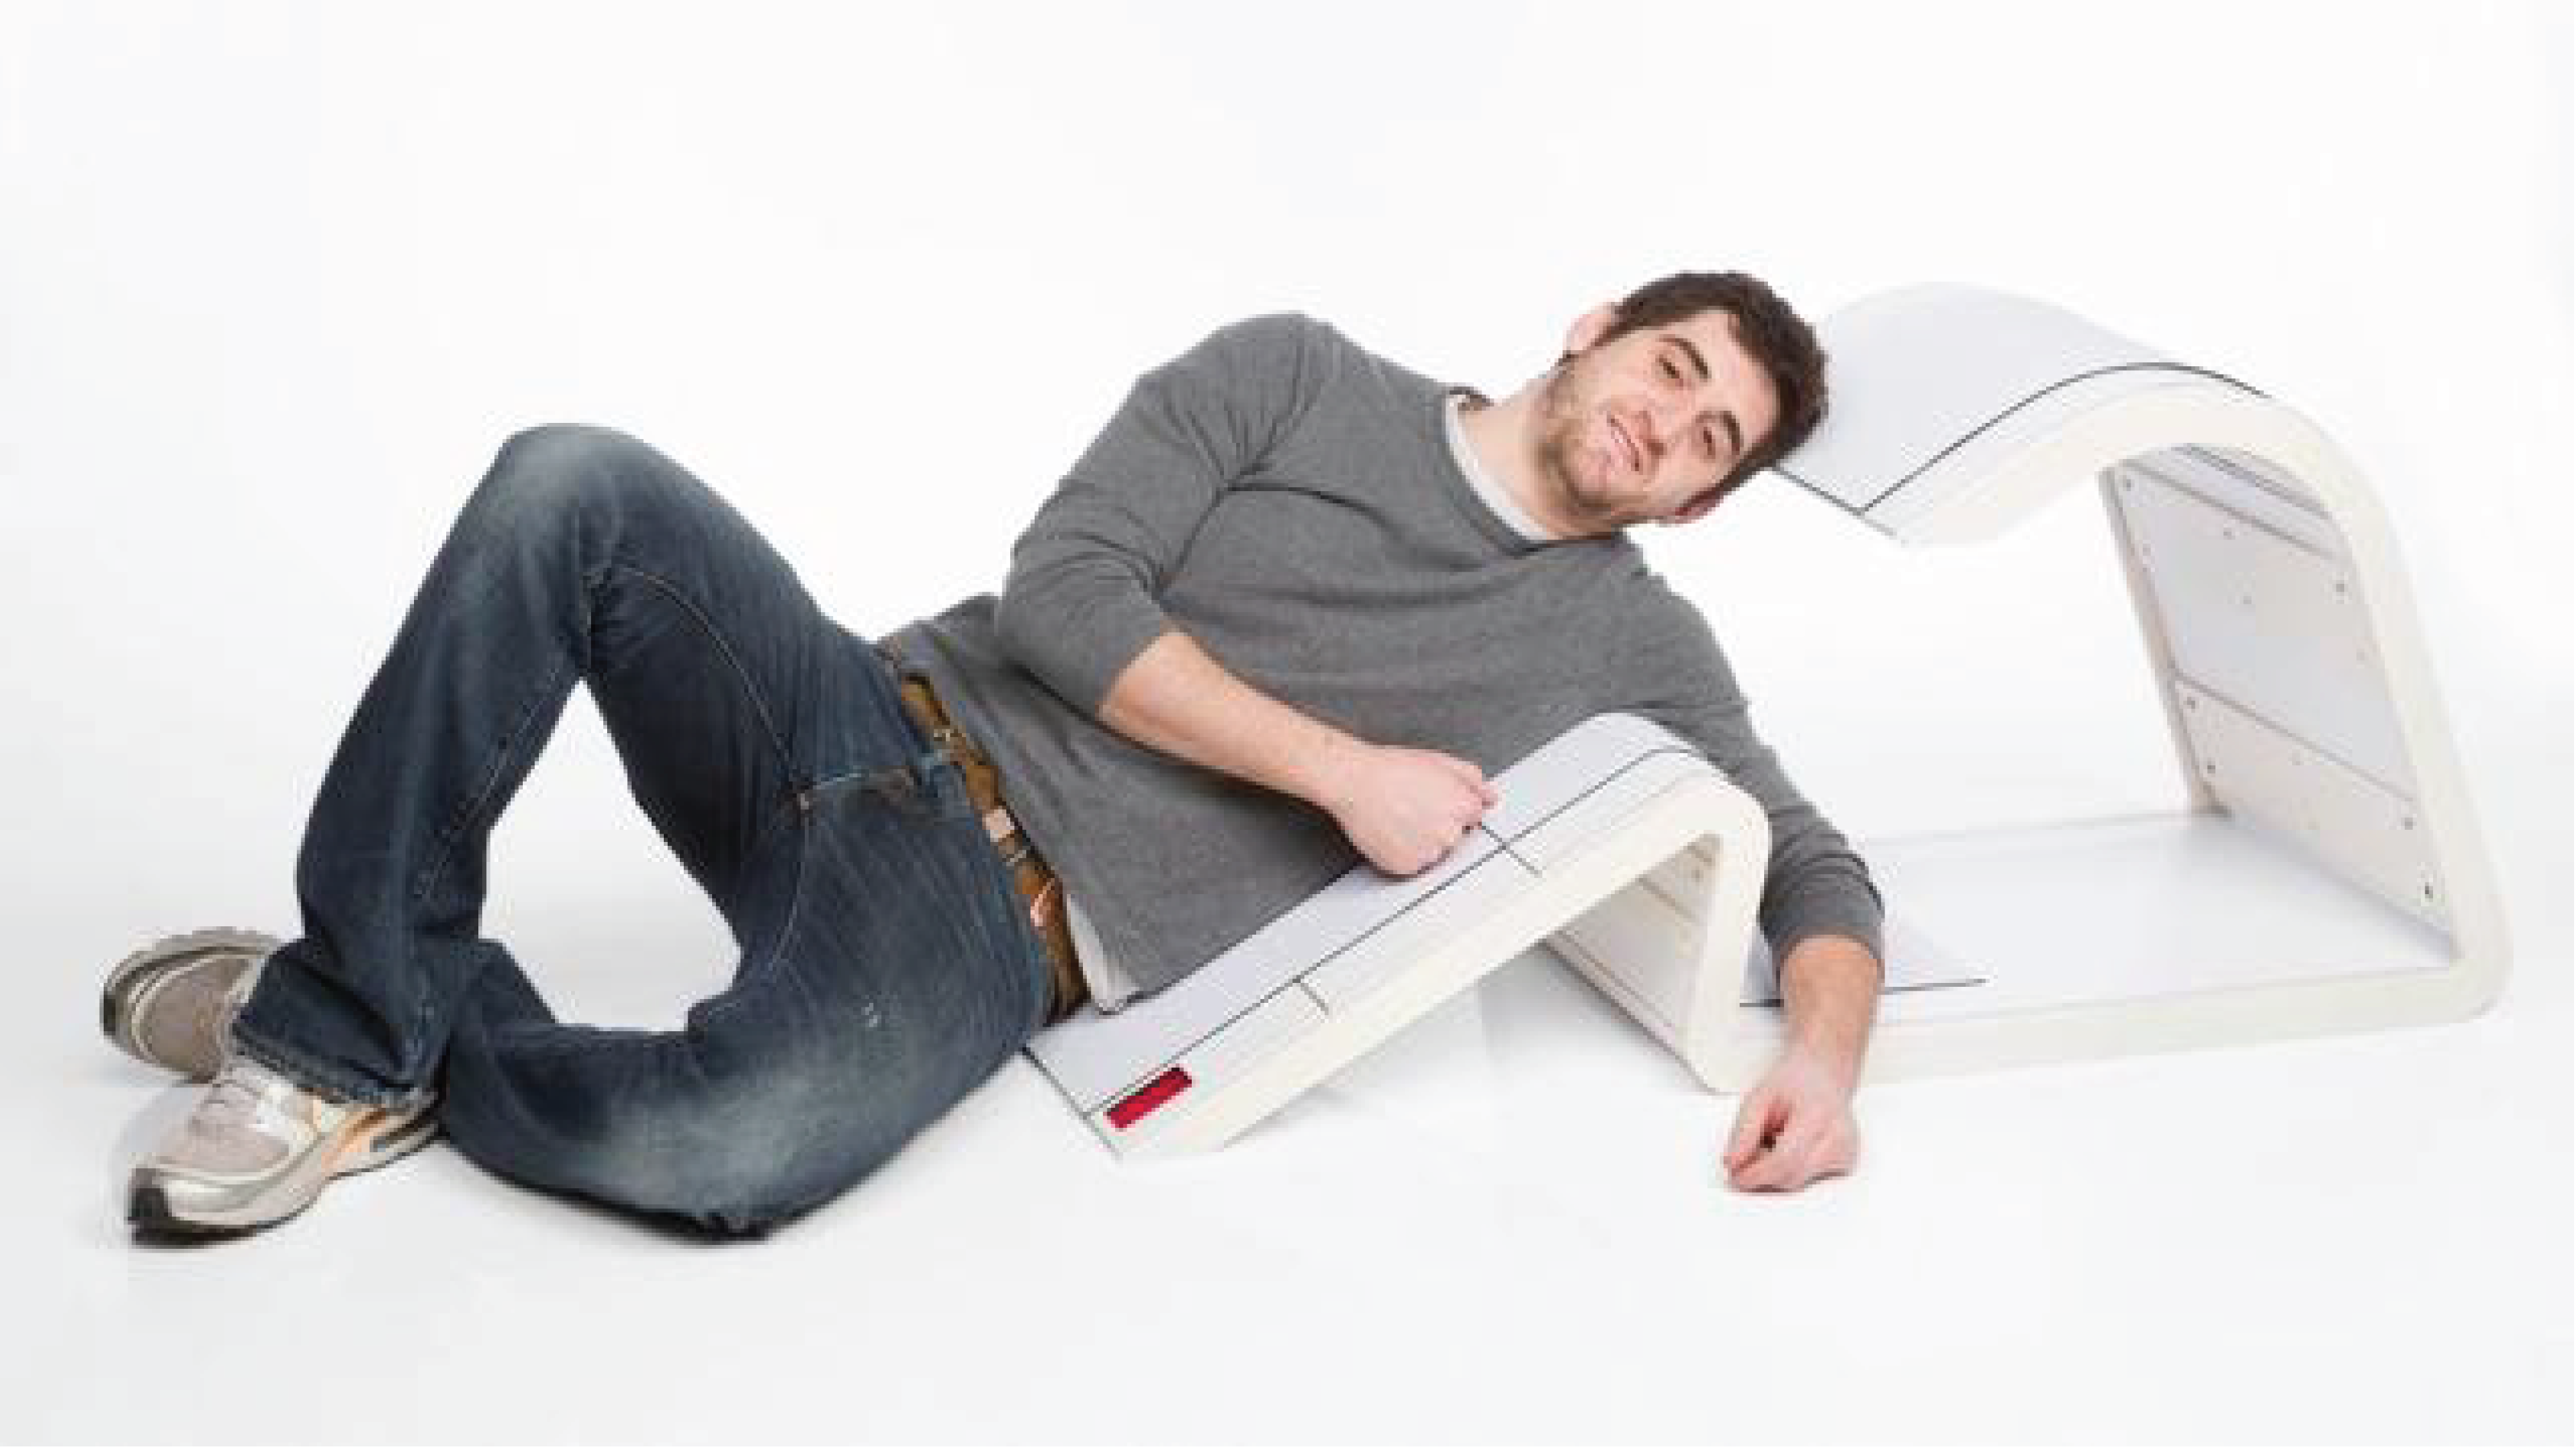 Student relaxing at the body-support device.